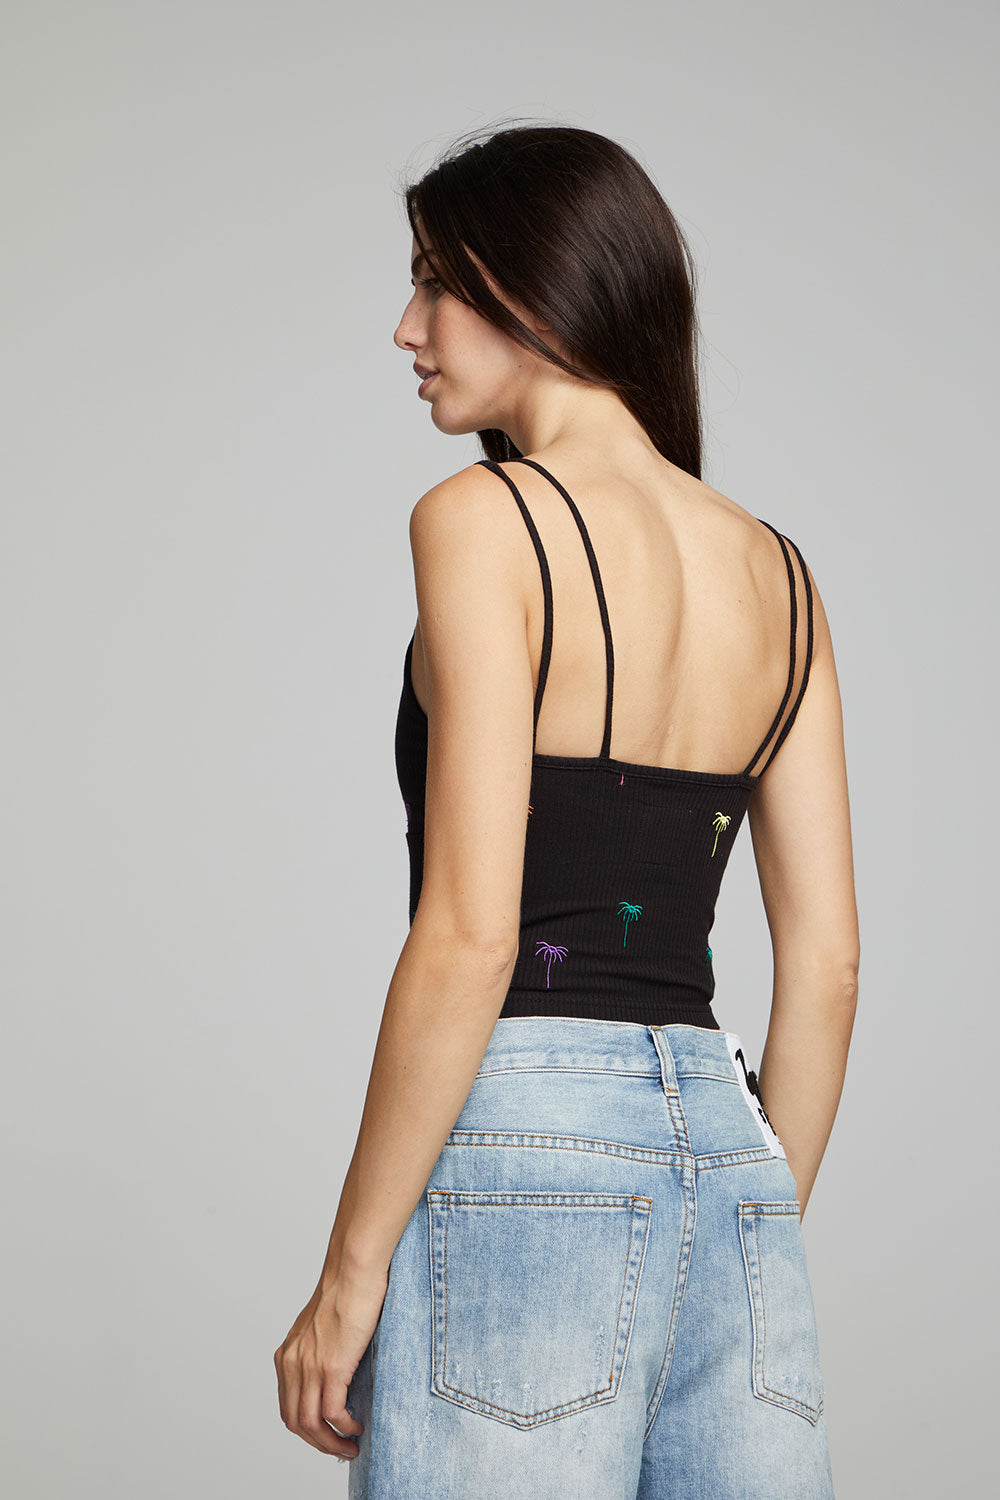 Strand Crop Top - Black Onyx WOMENS chaserbrand